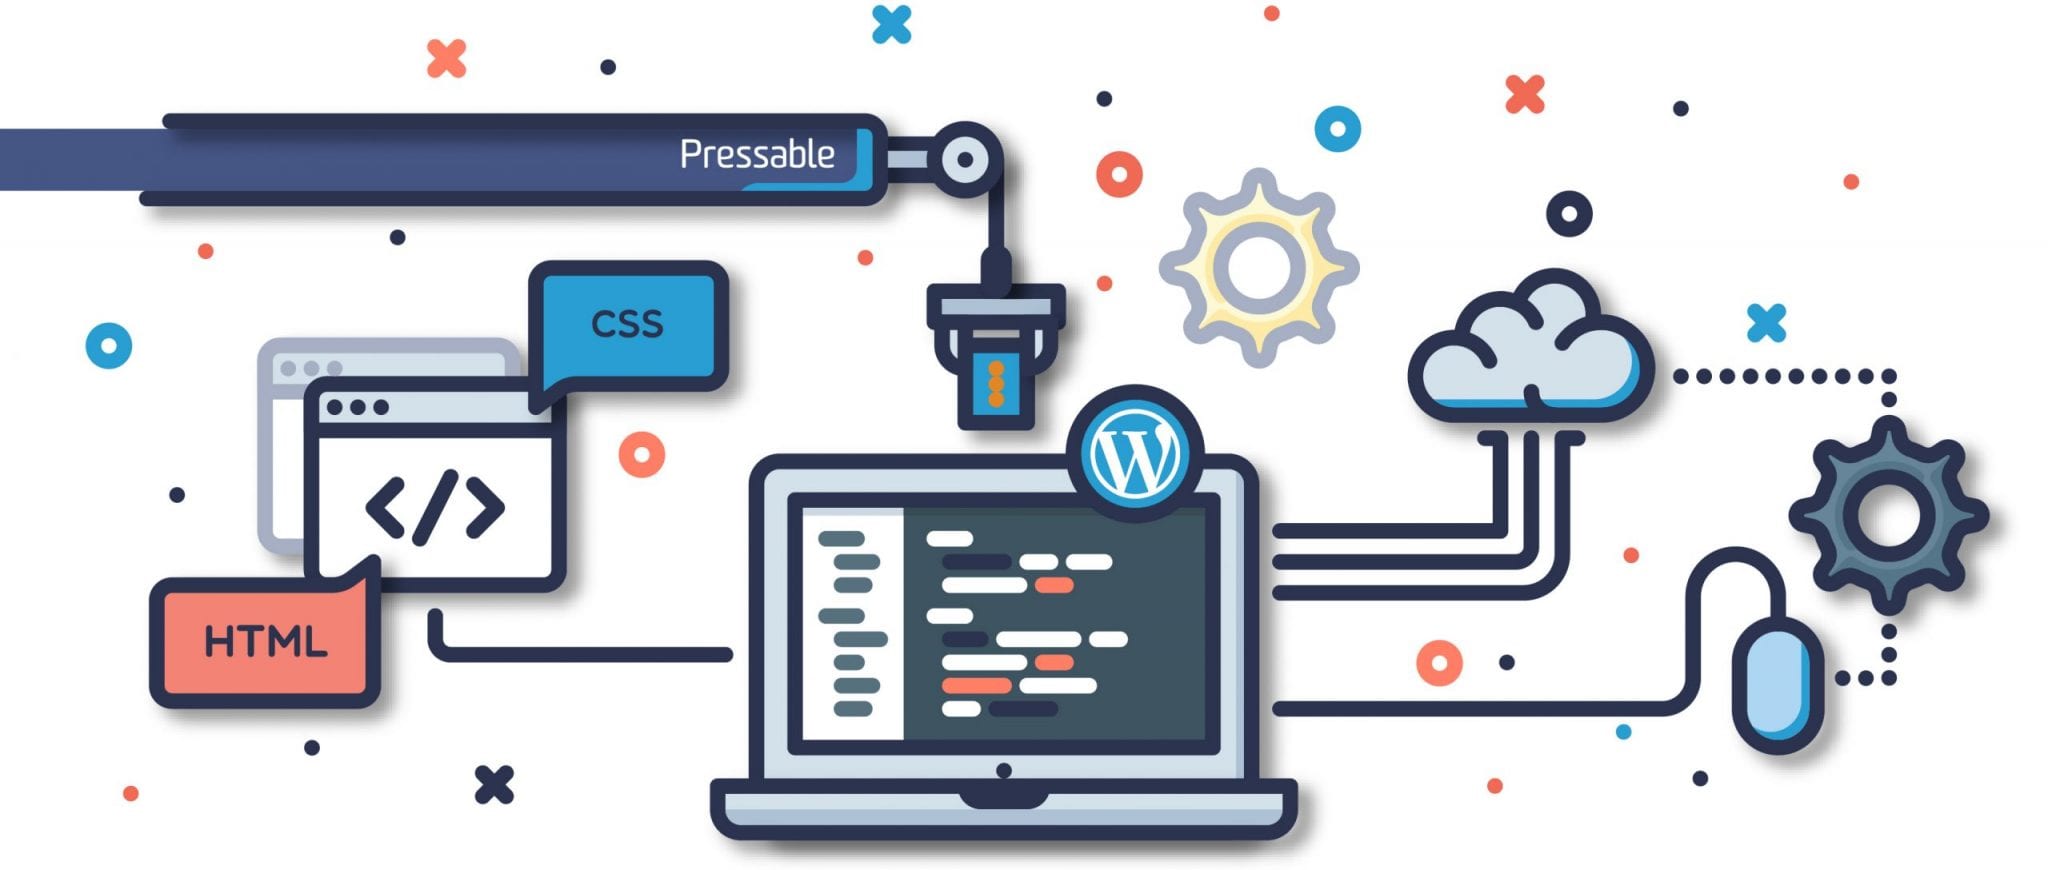 An infographic showing the building of a WordPress website.